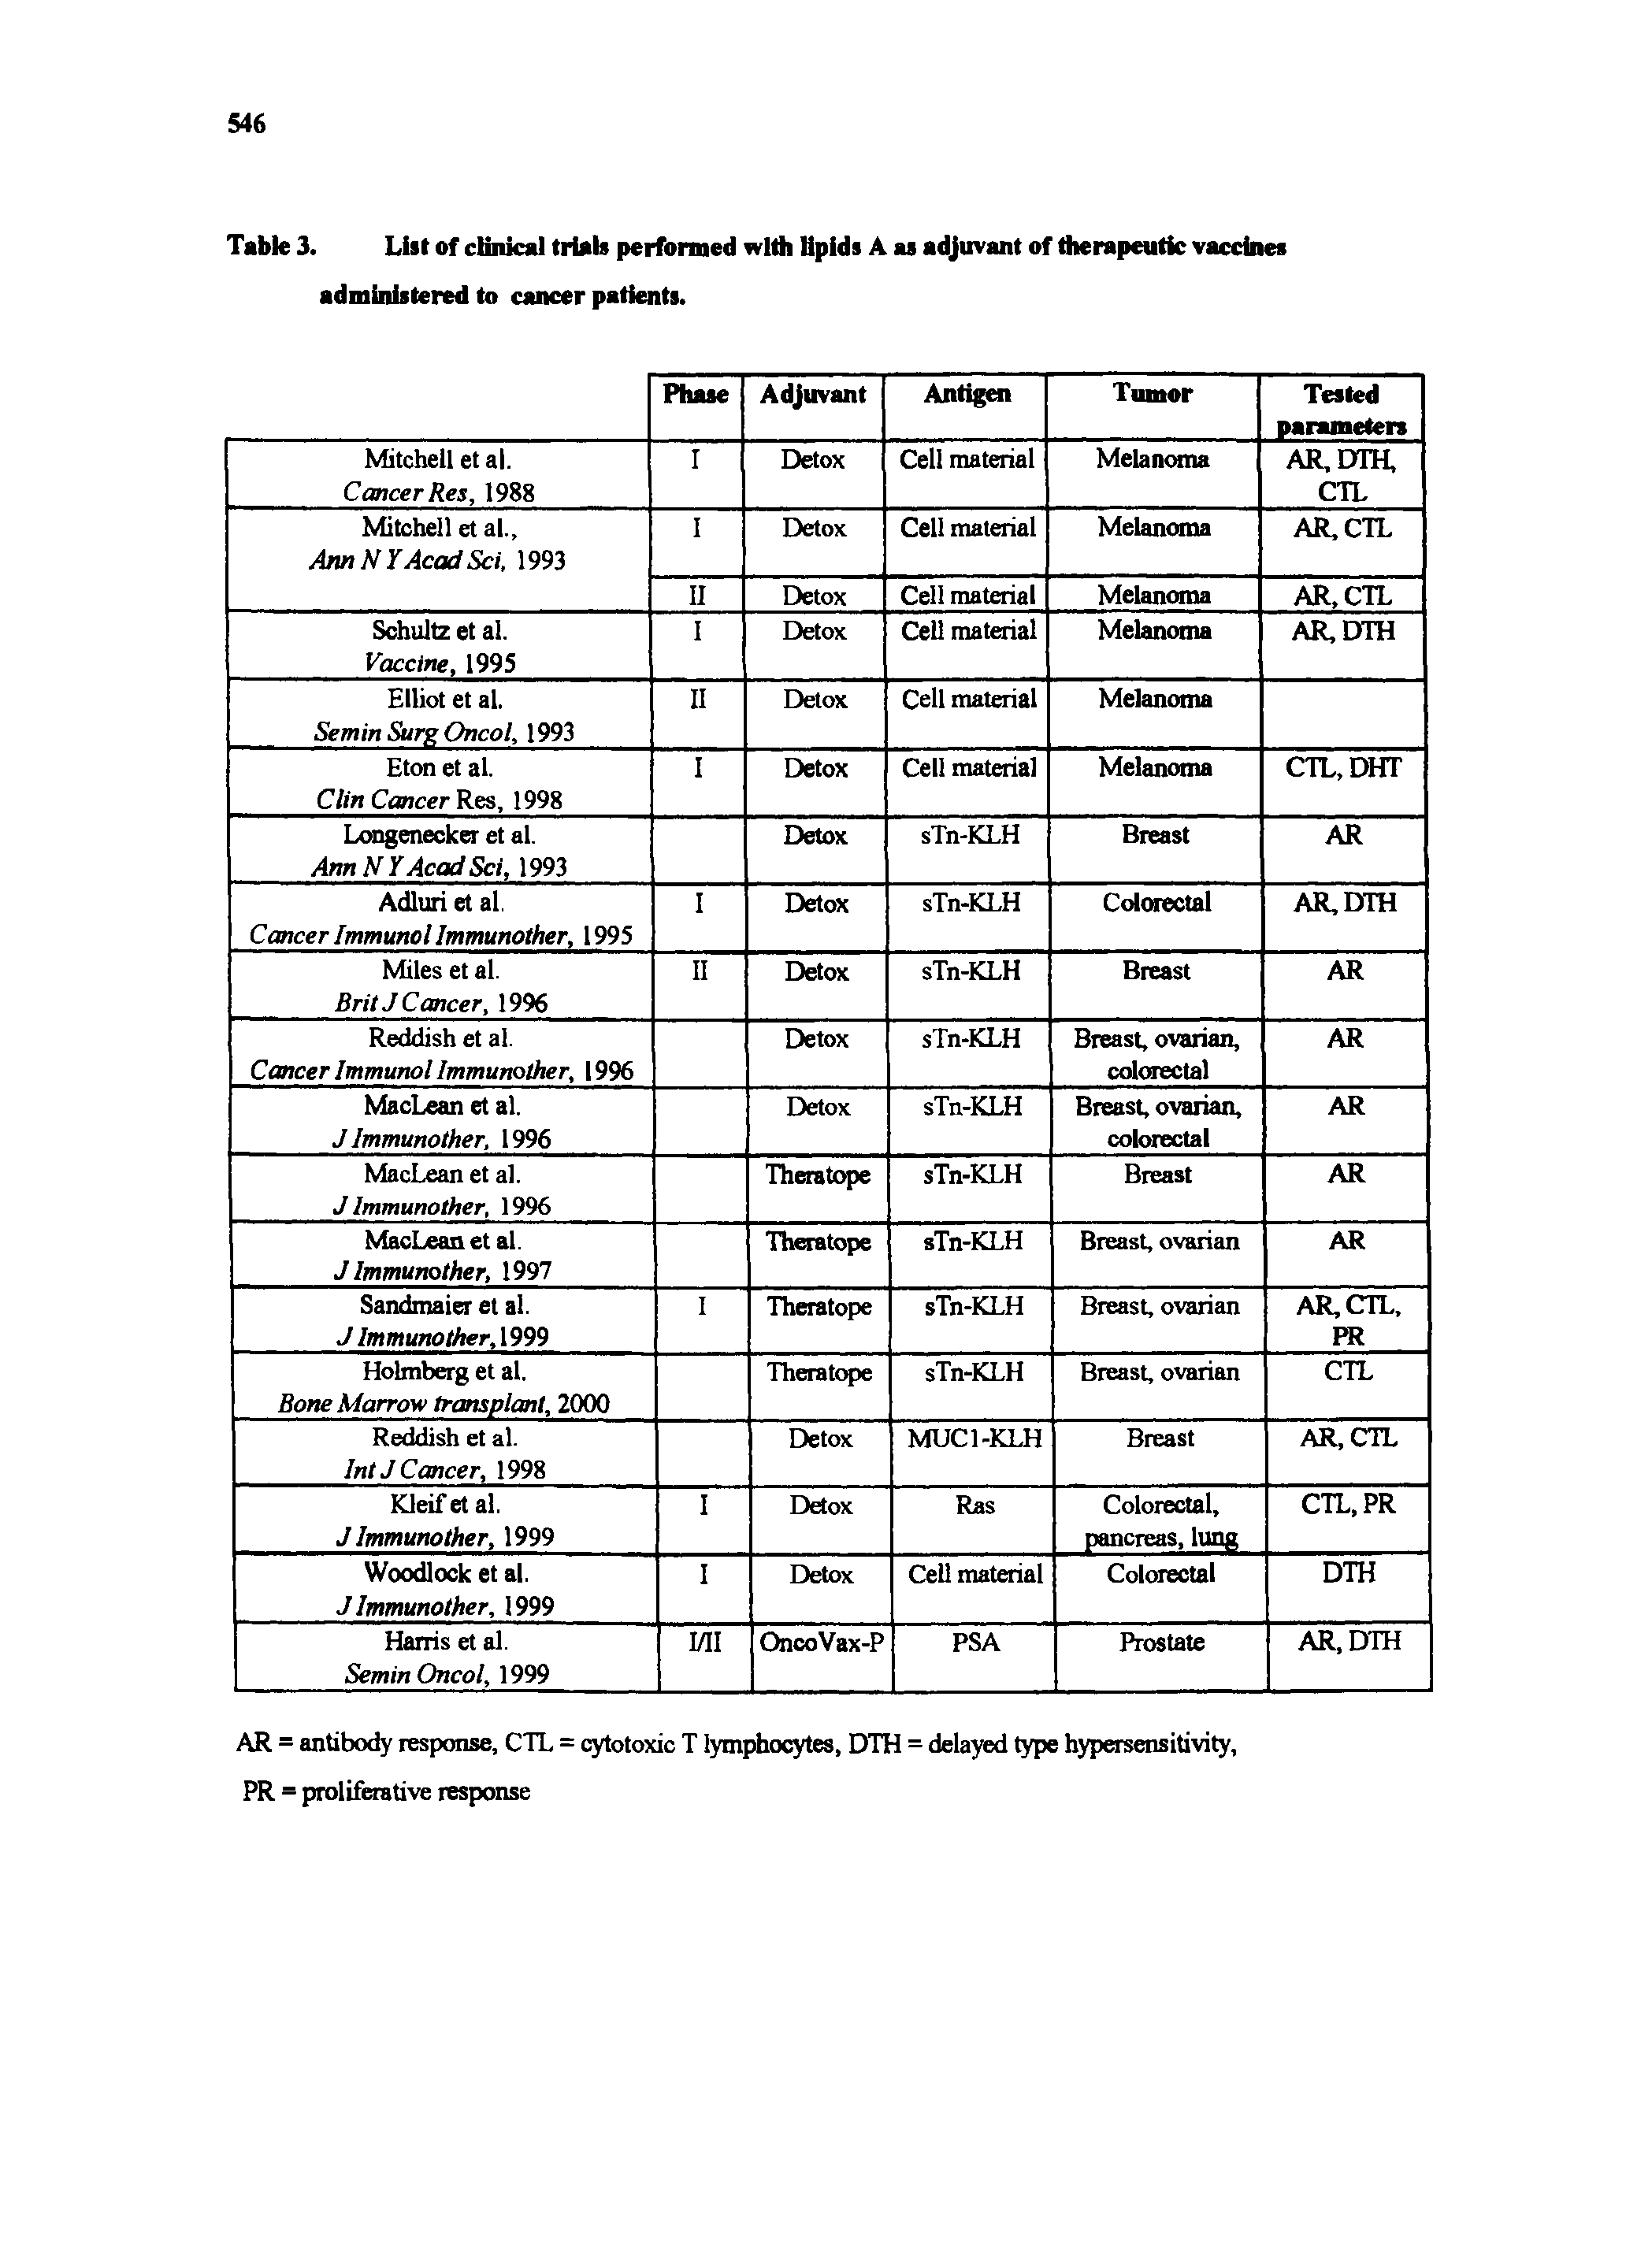 Table 3. List of clinical trials performed with lipids A as adjuvant of therapeutic vaccines administered to cancer patients.